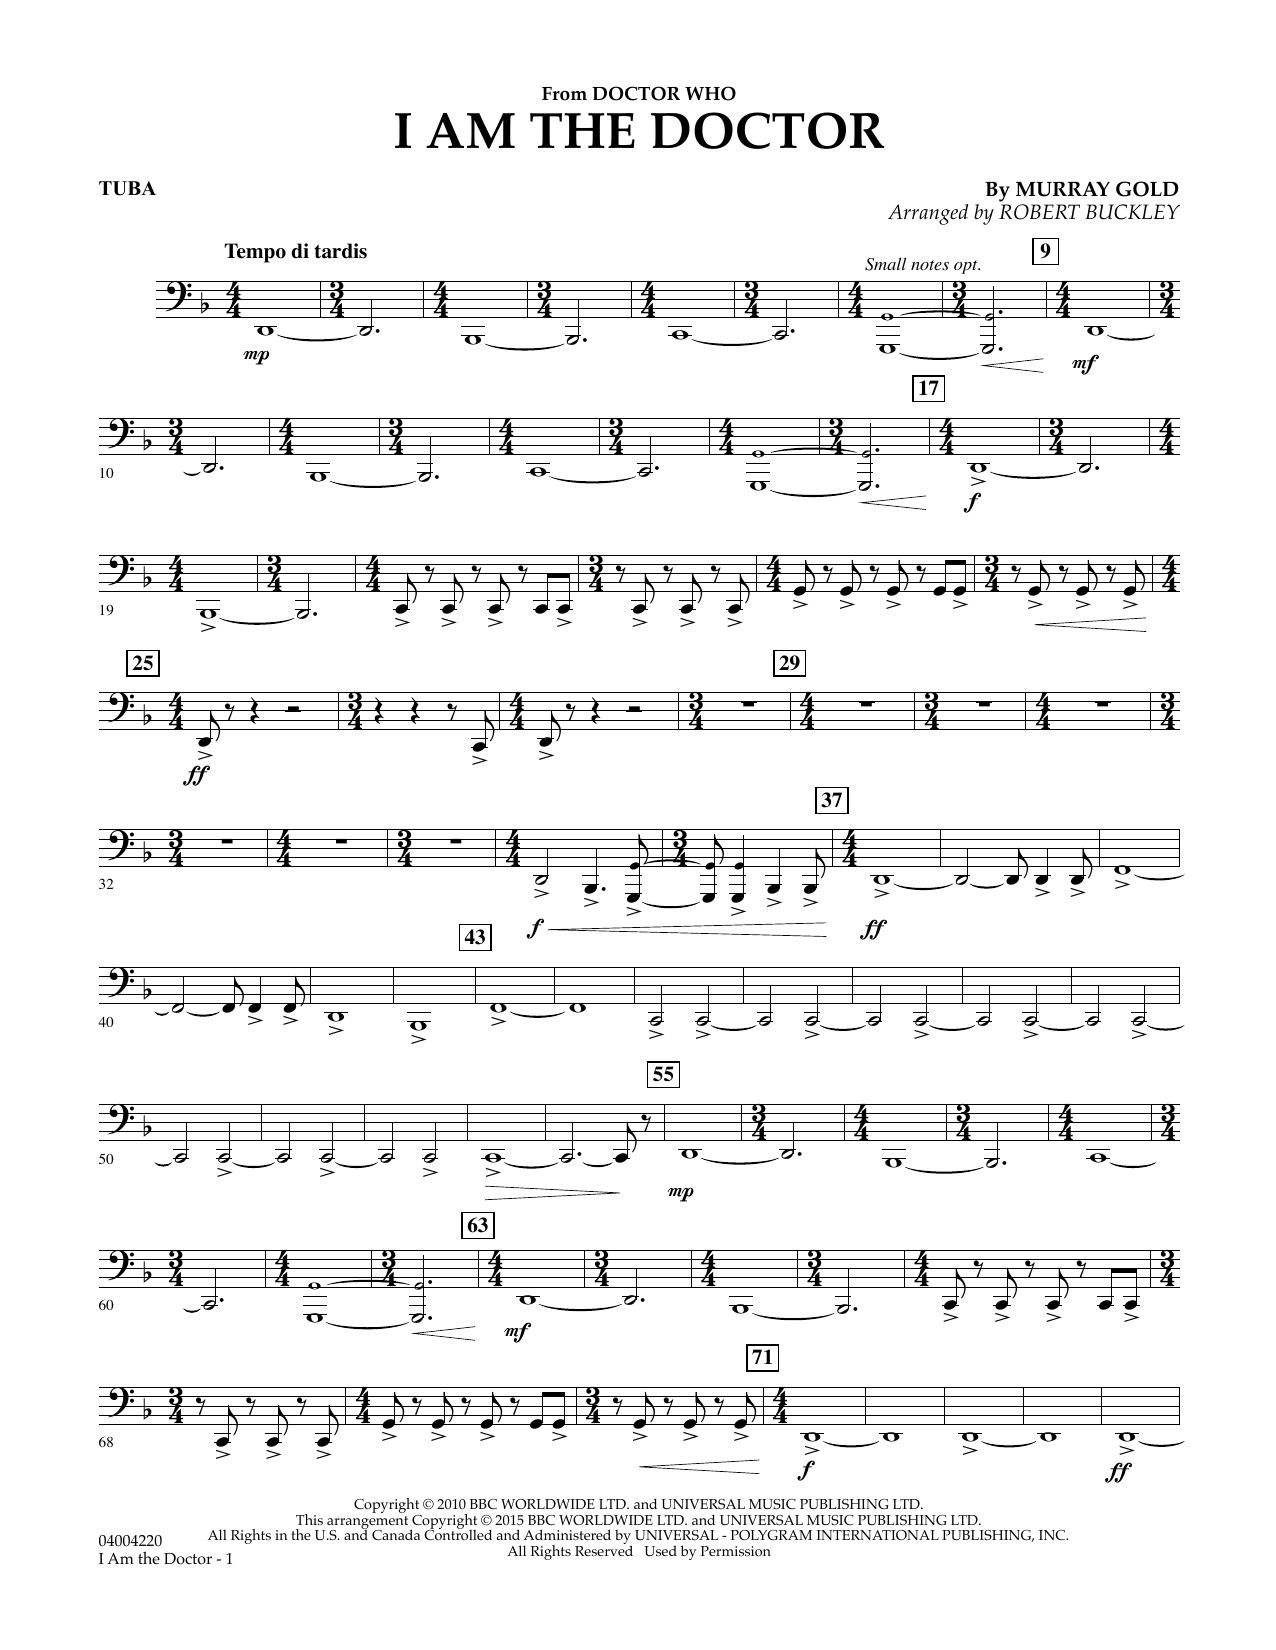 Robert Buckley I Am the Doctor (from Doctor Who) - Tuba sheet music notes and chords. Download Printable PDF.